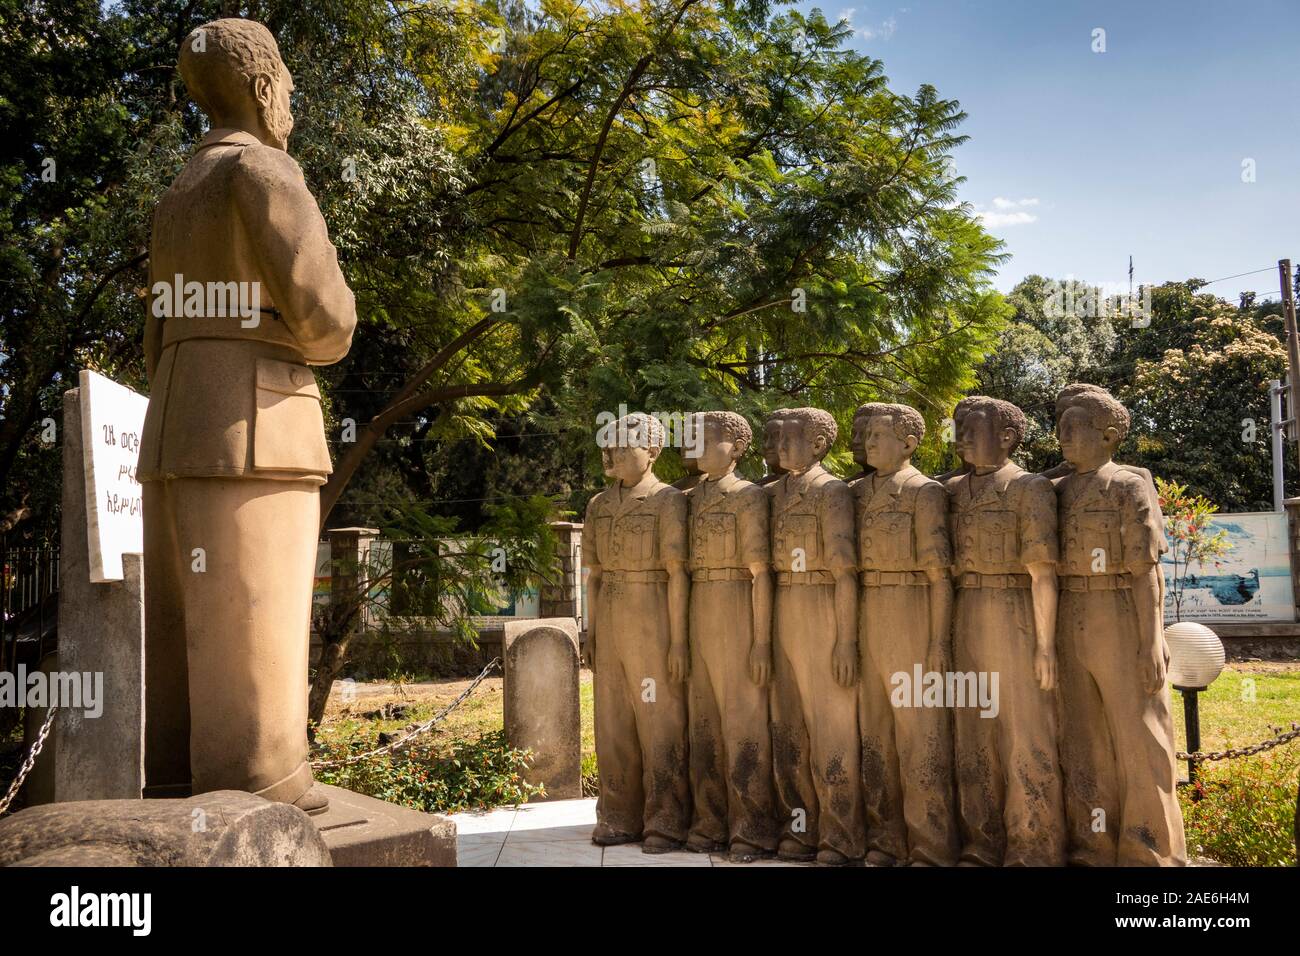 Ethiopia, Addus Ababa, National Museum of Ethiopia, statue of Emperor Haile Selassie, giving directions to 12 students at end of monarchial regime, fo Stock Photo